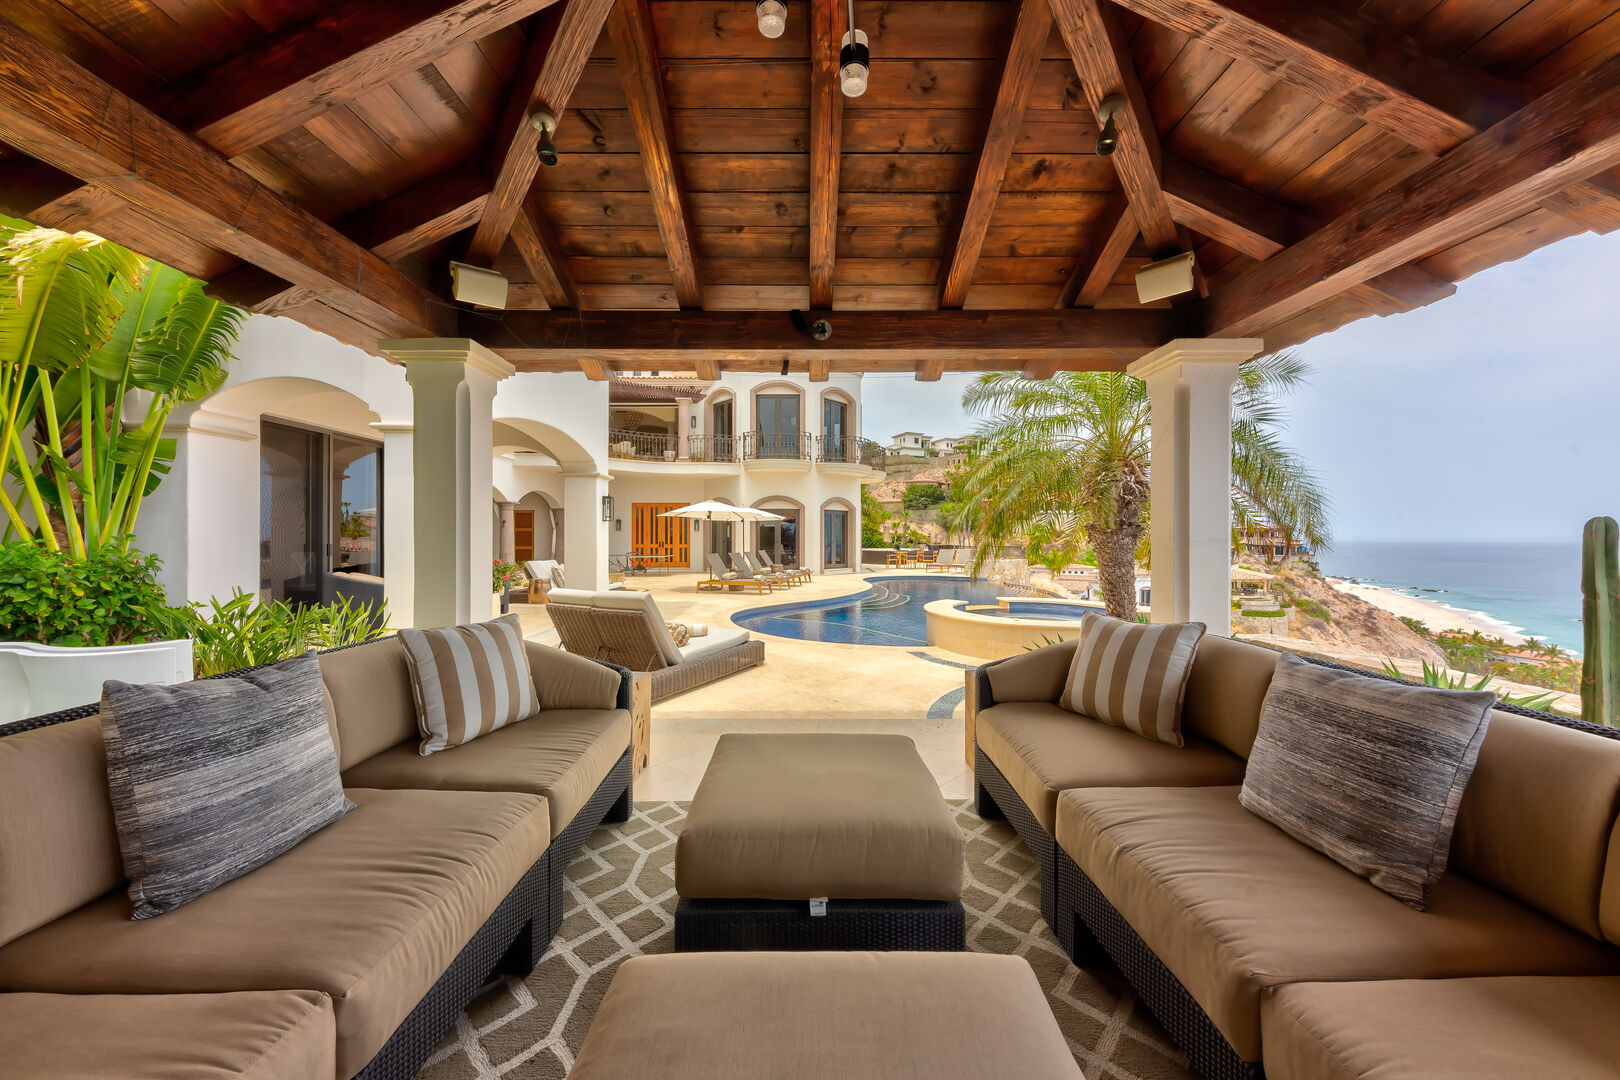 The outdoor fire place seating area with an ocean view at Hacienda 502